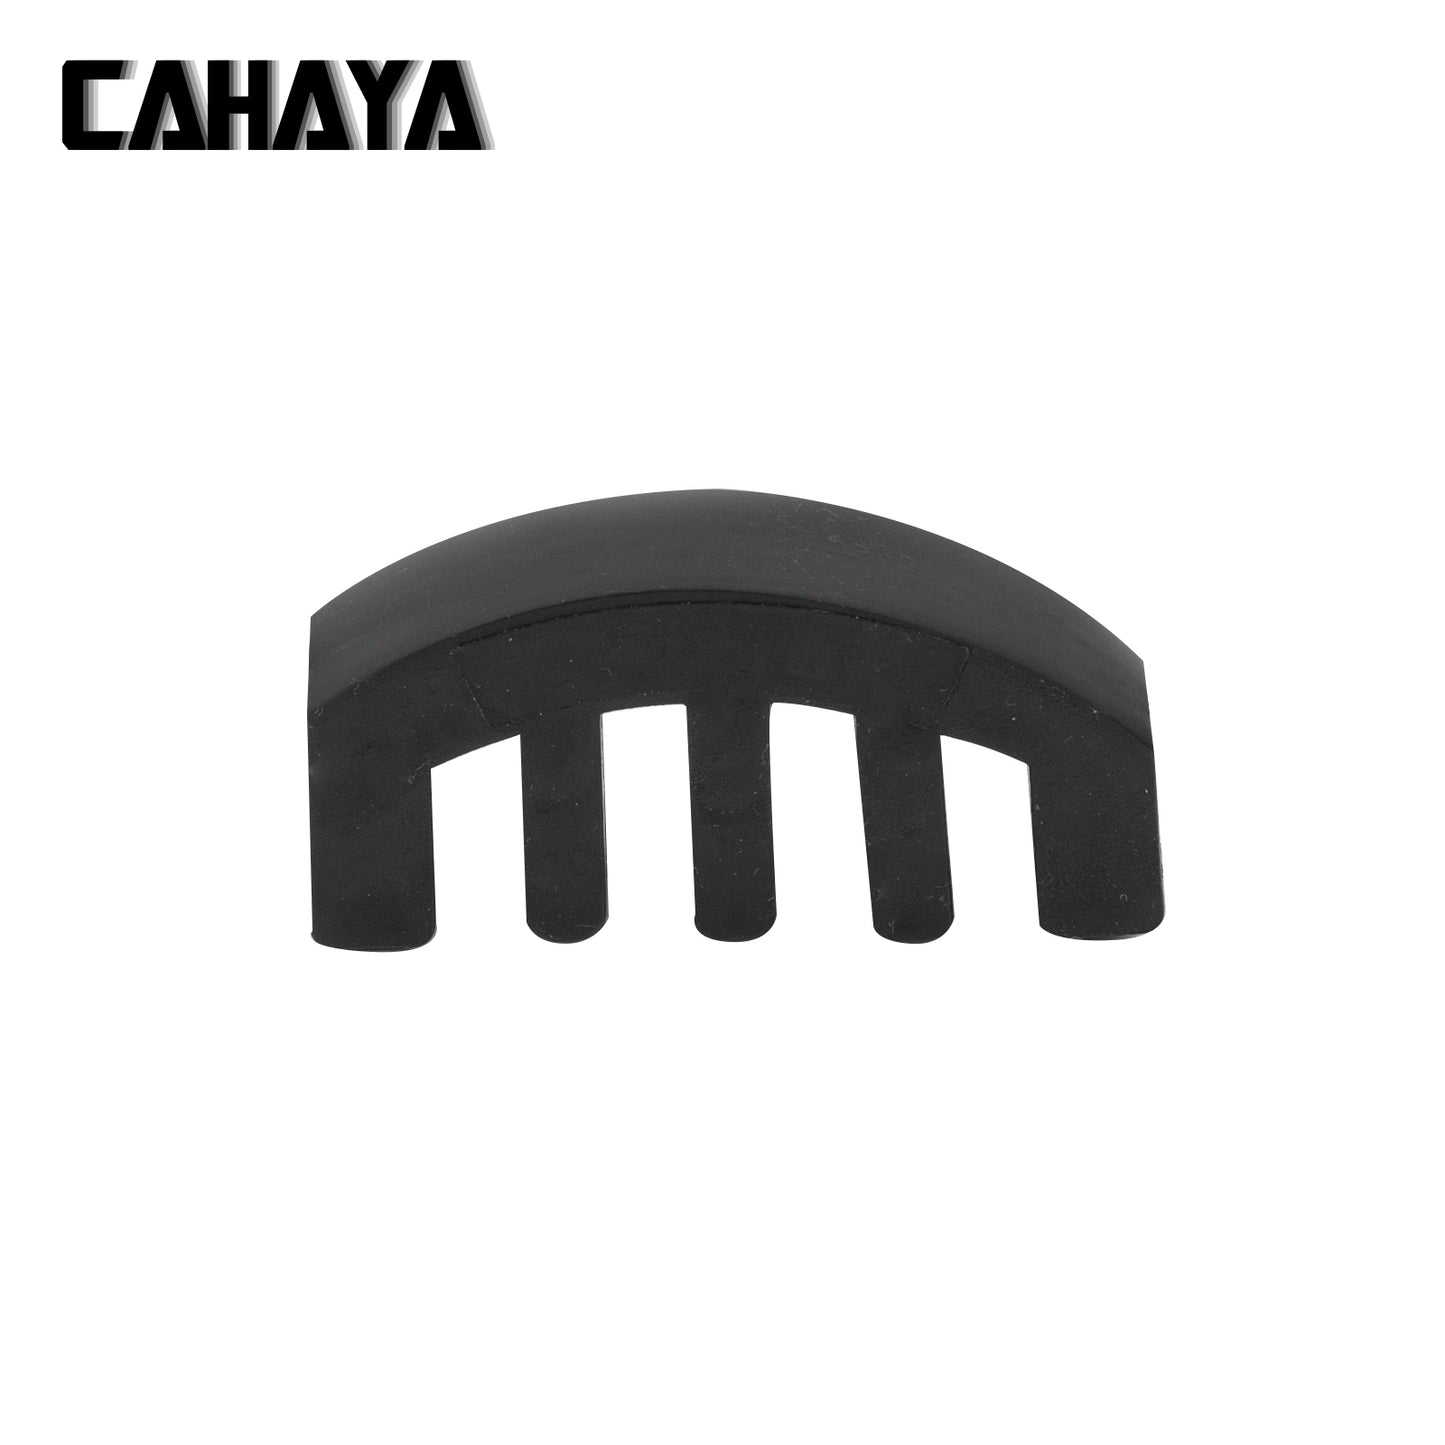 CAHAYA Rubber 4/4 Violin Practice Mute Mutes for Musical Instruments